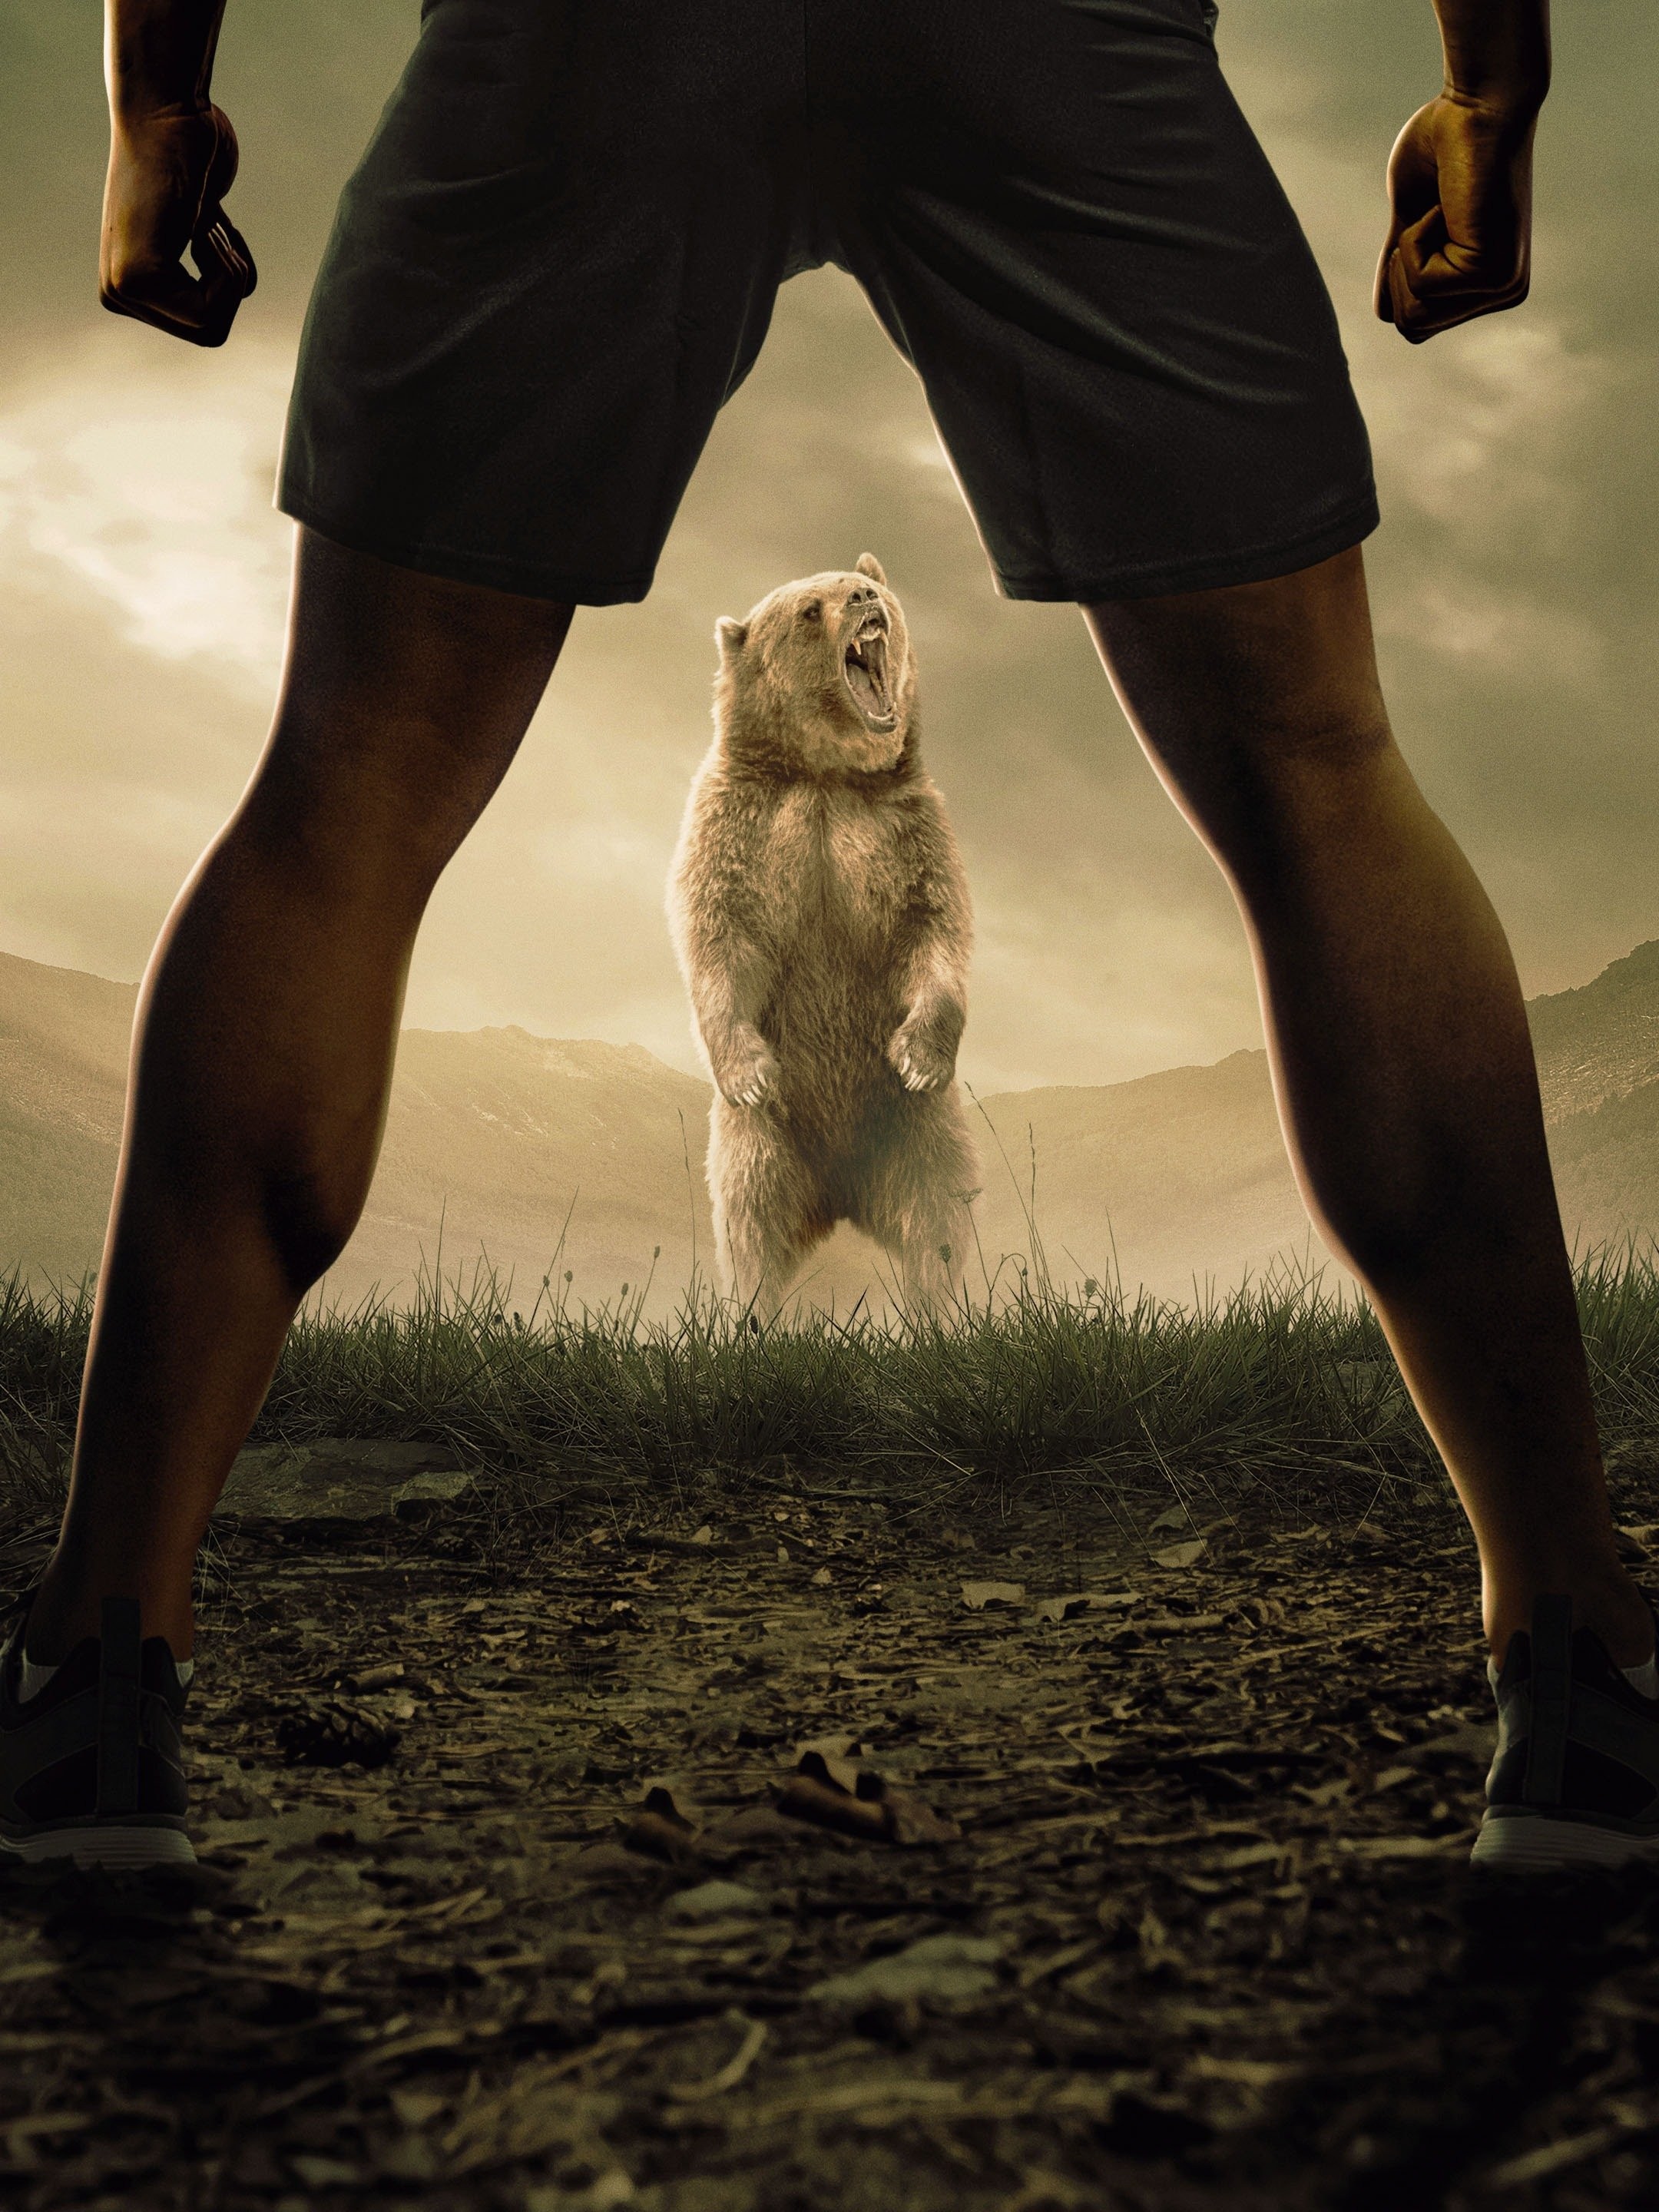 Man Vs Bear TV series slammed by PETA – but what was Discovery